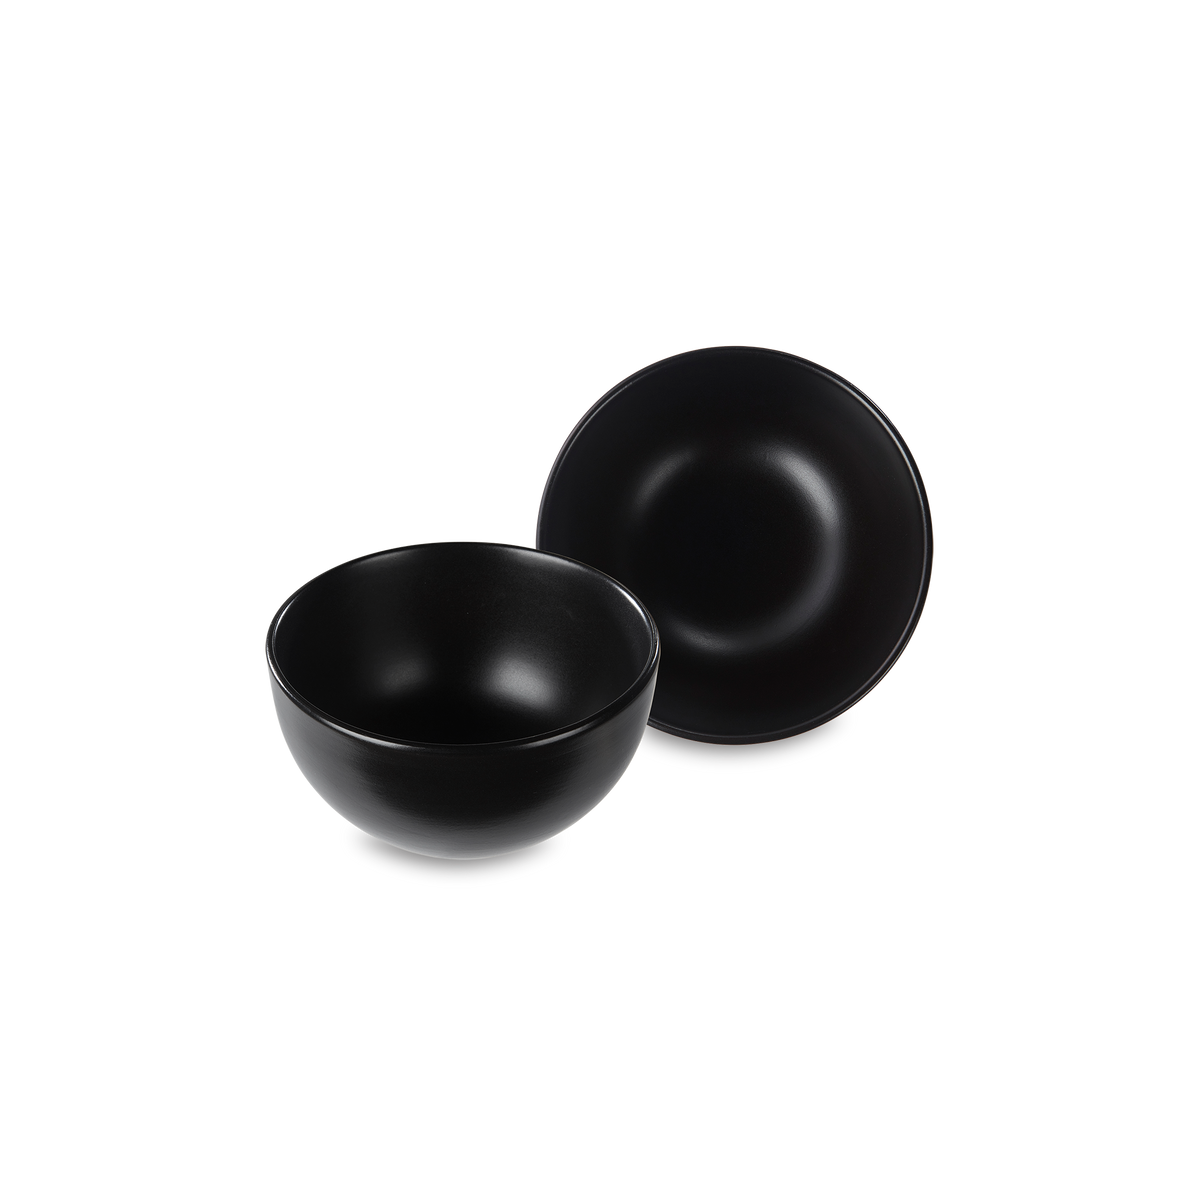 Product photo, set of two black stoneware ceral bowls.